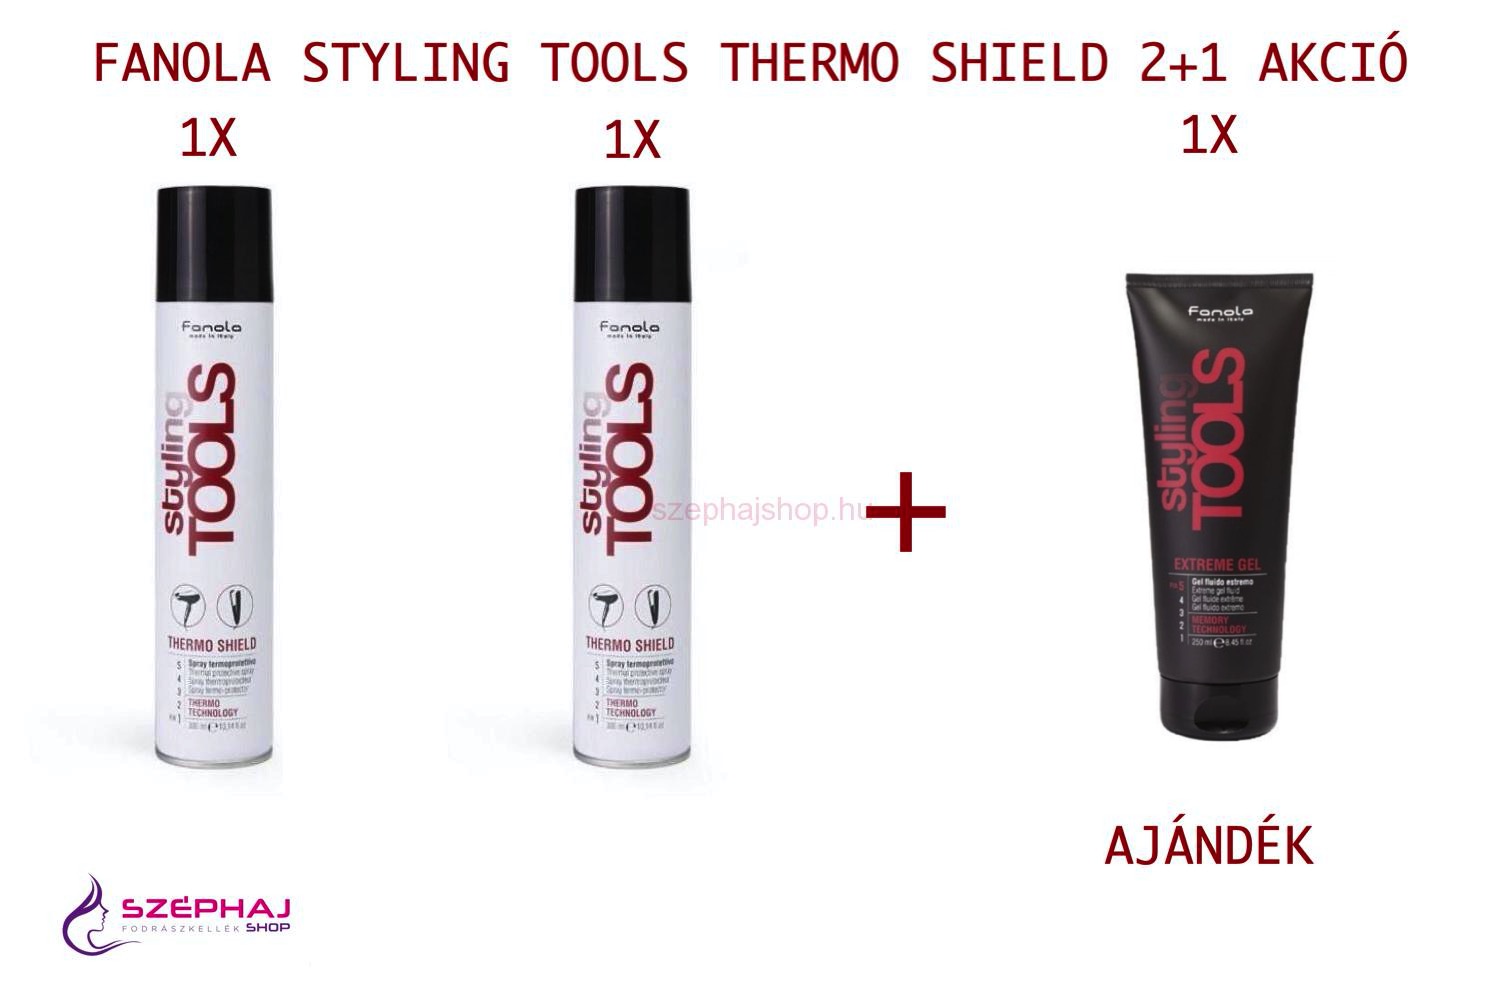 FANOLA Styling Tools Thermo Shield 300 ml 2+1 AKCIÓ